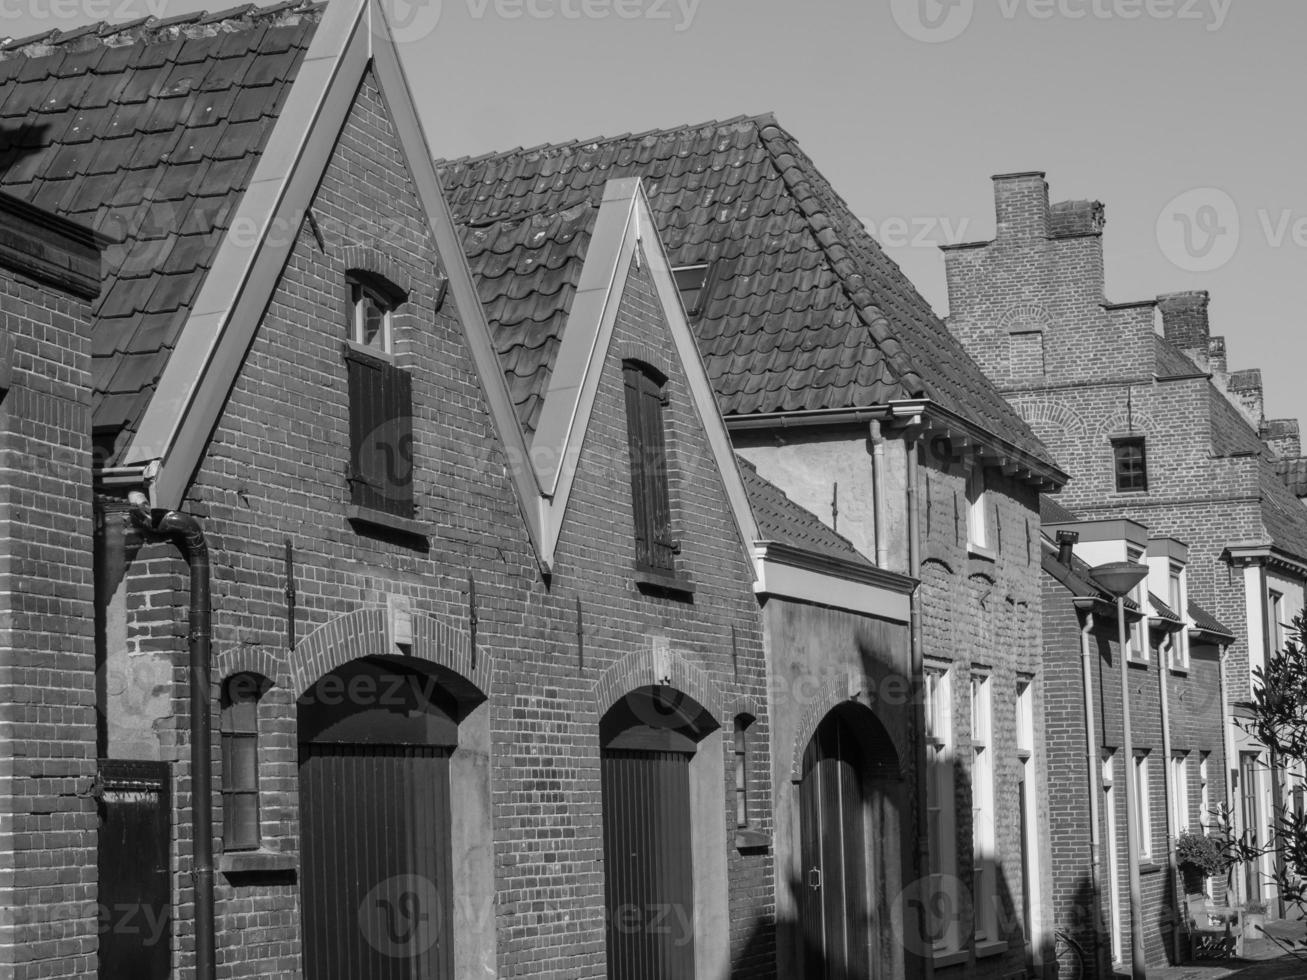 Doesburg in the netherlands photo